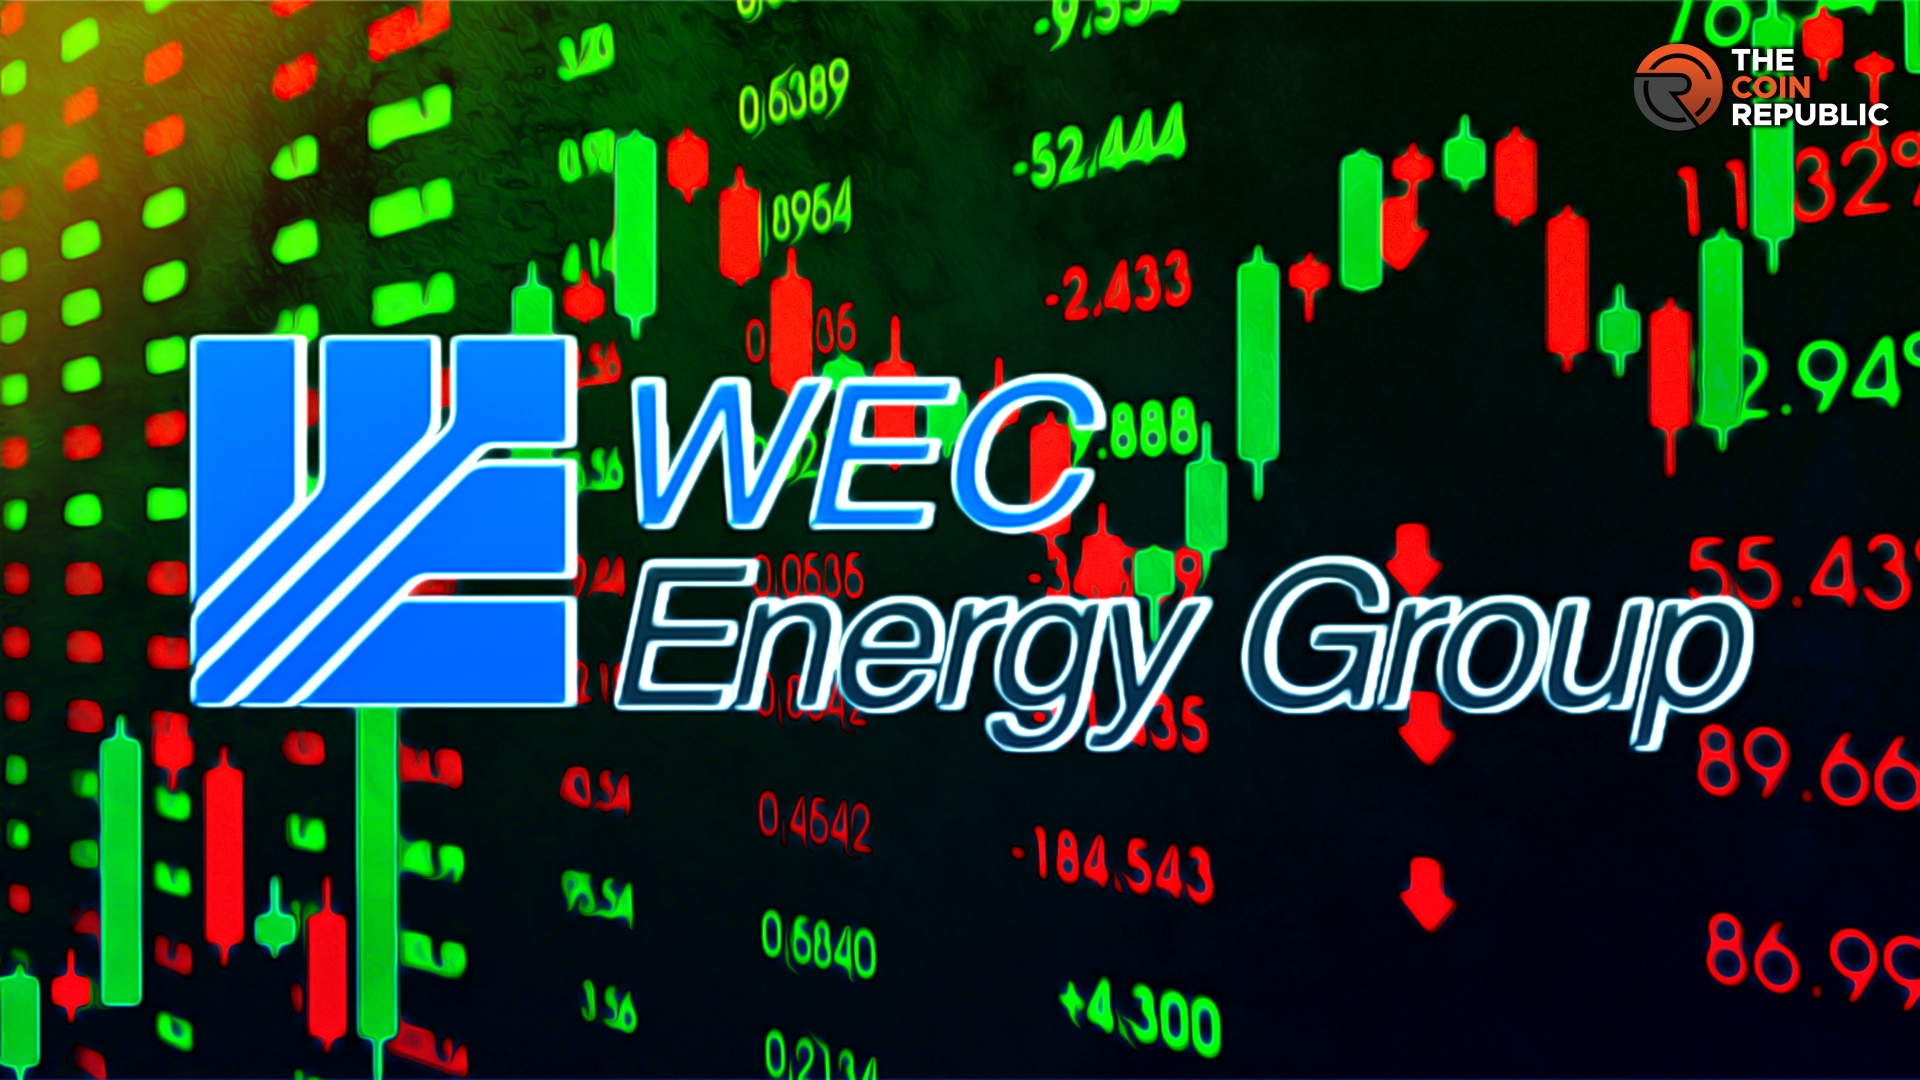 WEC Energy Group Inc.: Is WEC Stock Price Ready For $100 Mark?